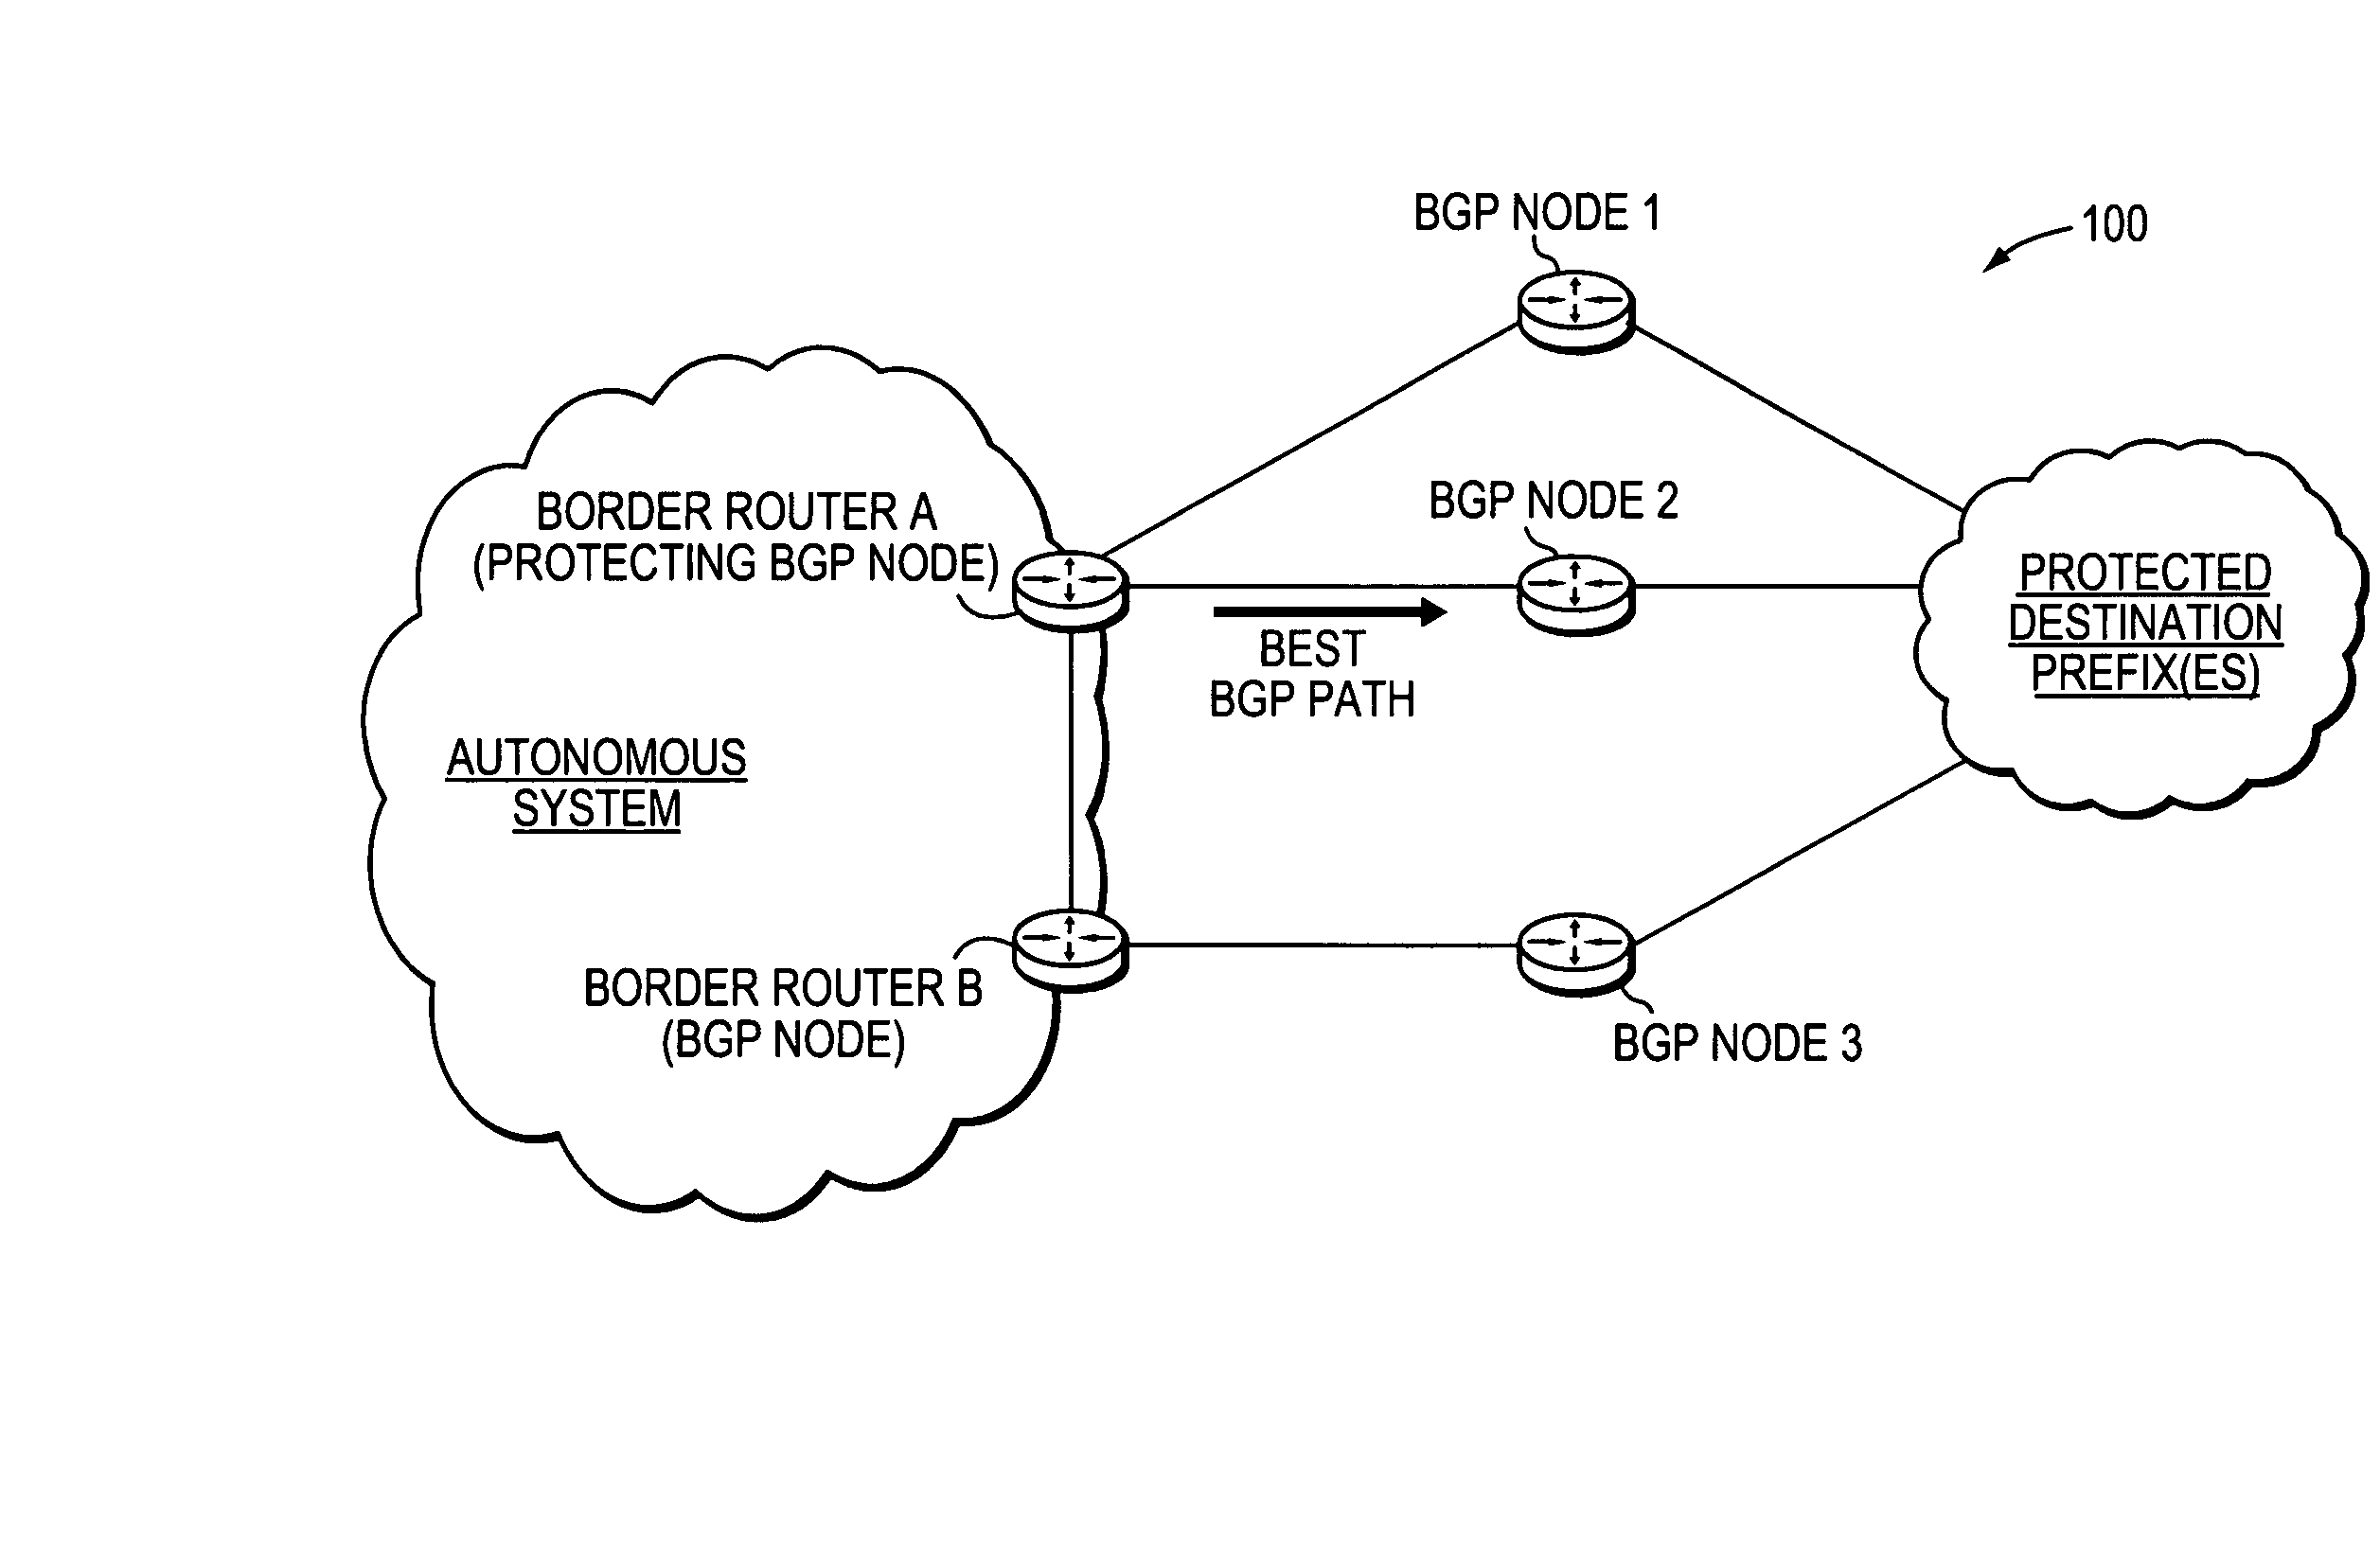 Backup BGP paths for non-multipath BGP fast convergence